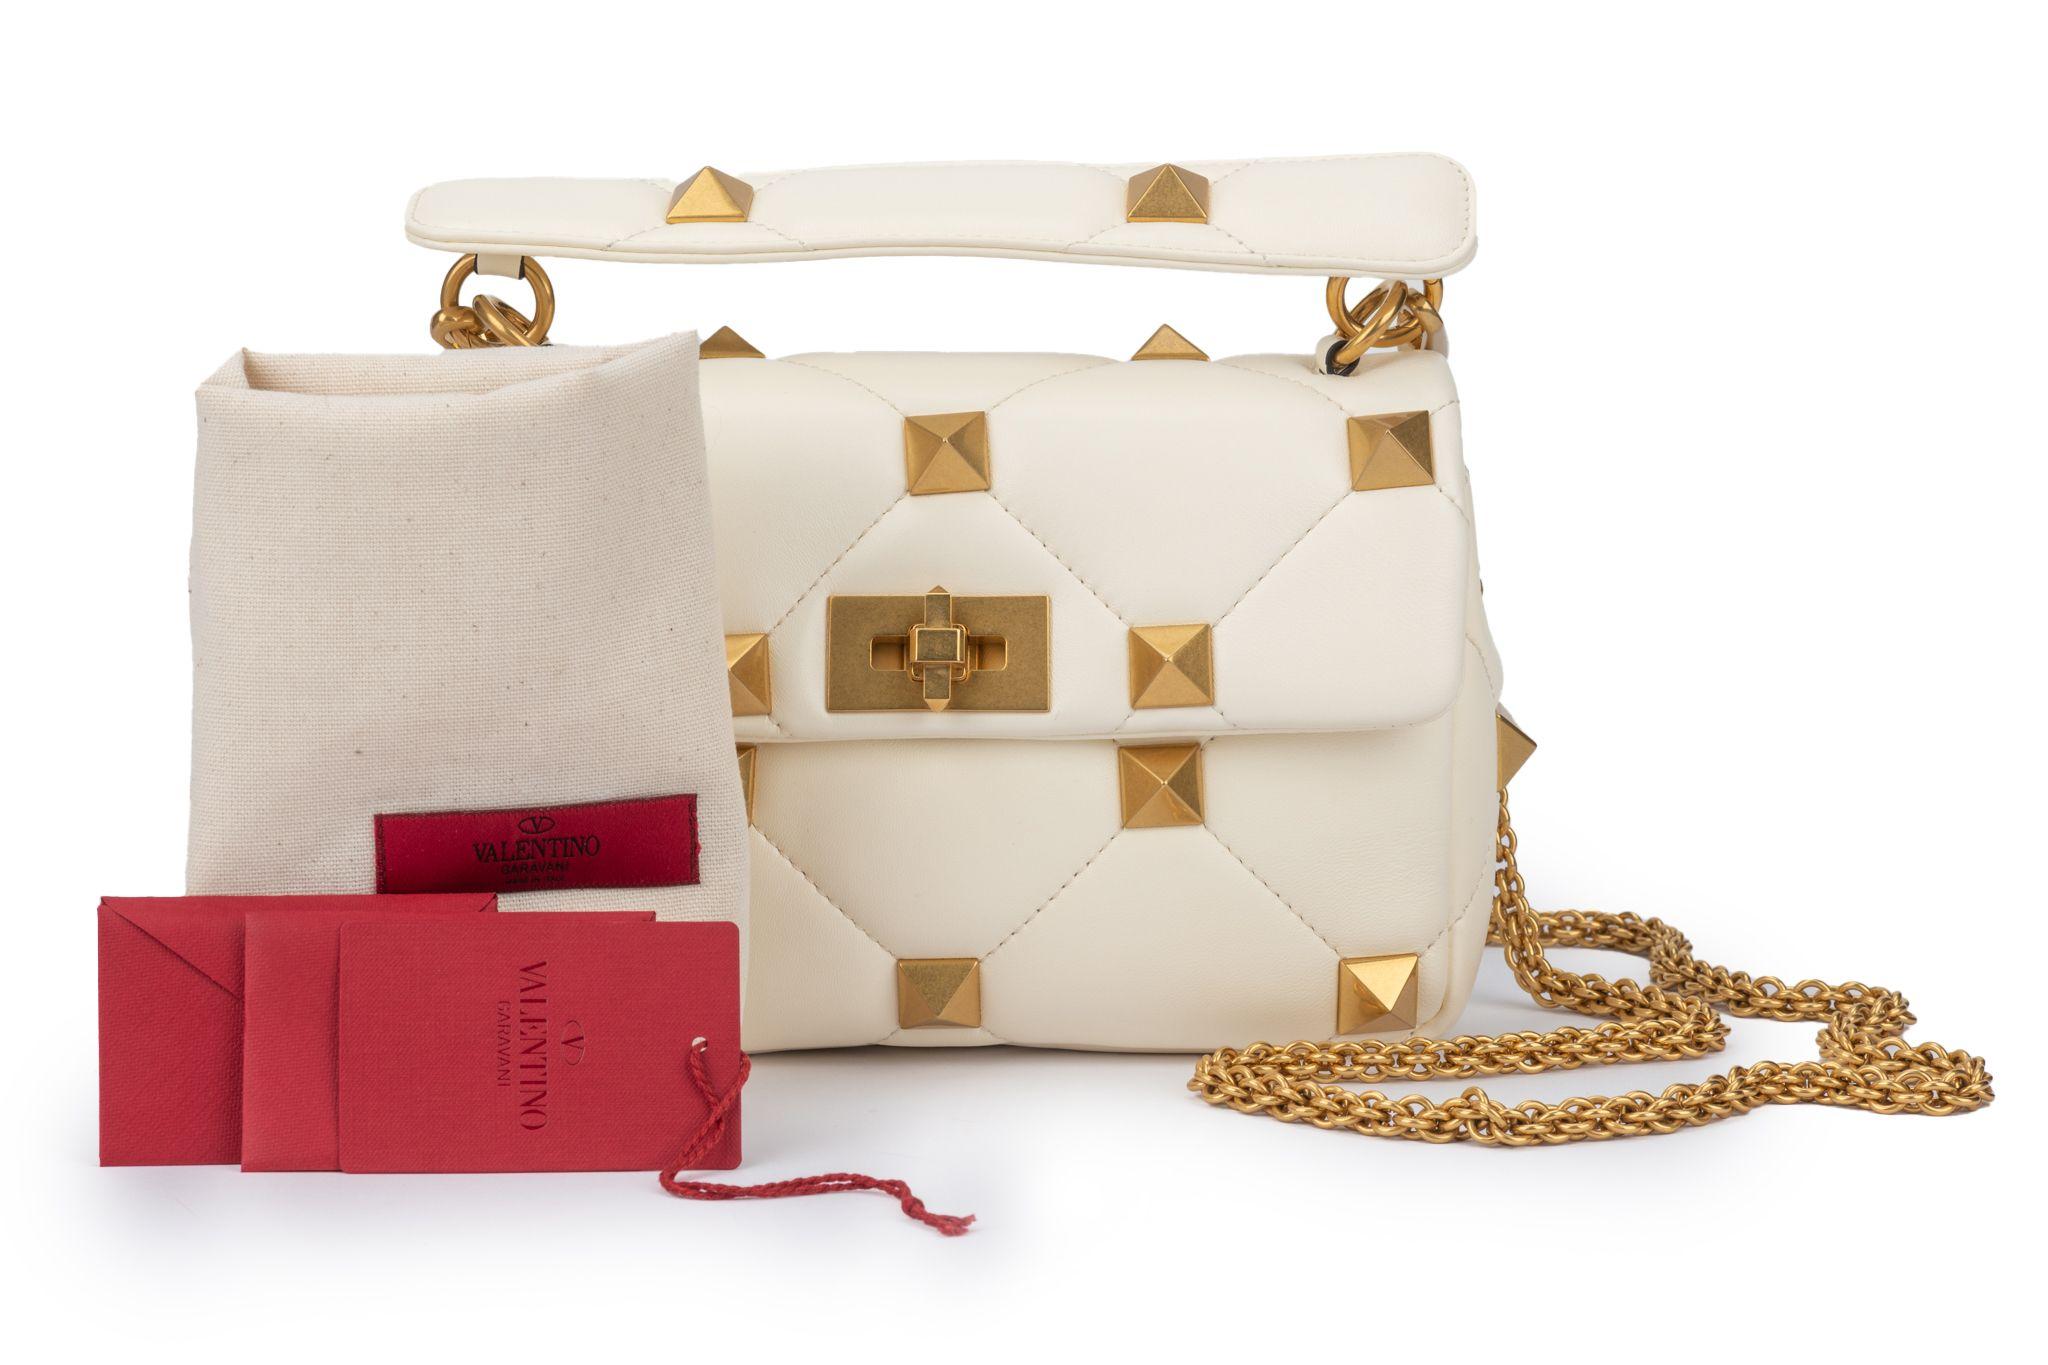 Valentino Garavani Roman Stud The Shoulder Bag in lambskin nappa with chain. Quilted construction, embellished with maxi studs. Equipped with both a detachable sliding chain strap (25”) and a detachable handle.(3”) The bag is new and comes with the